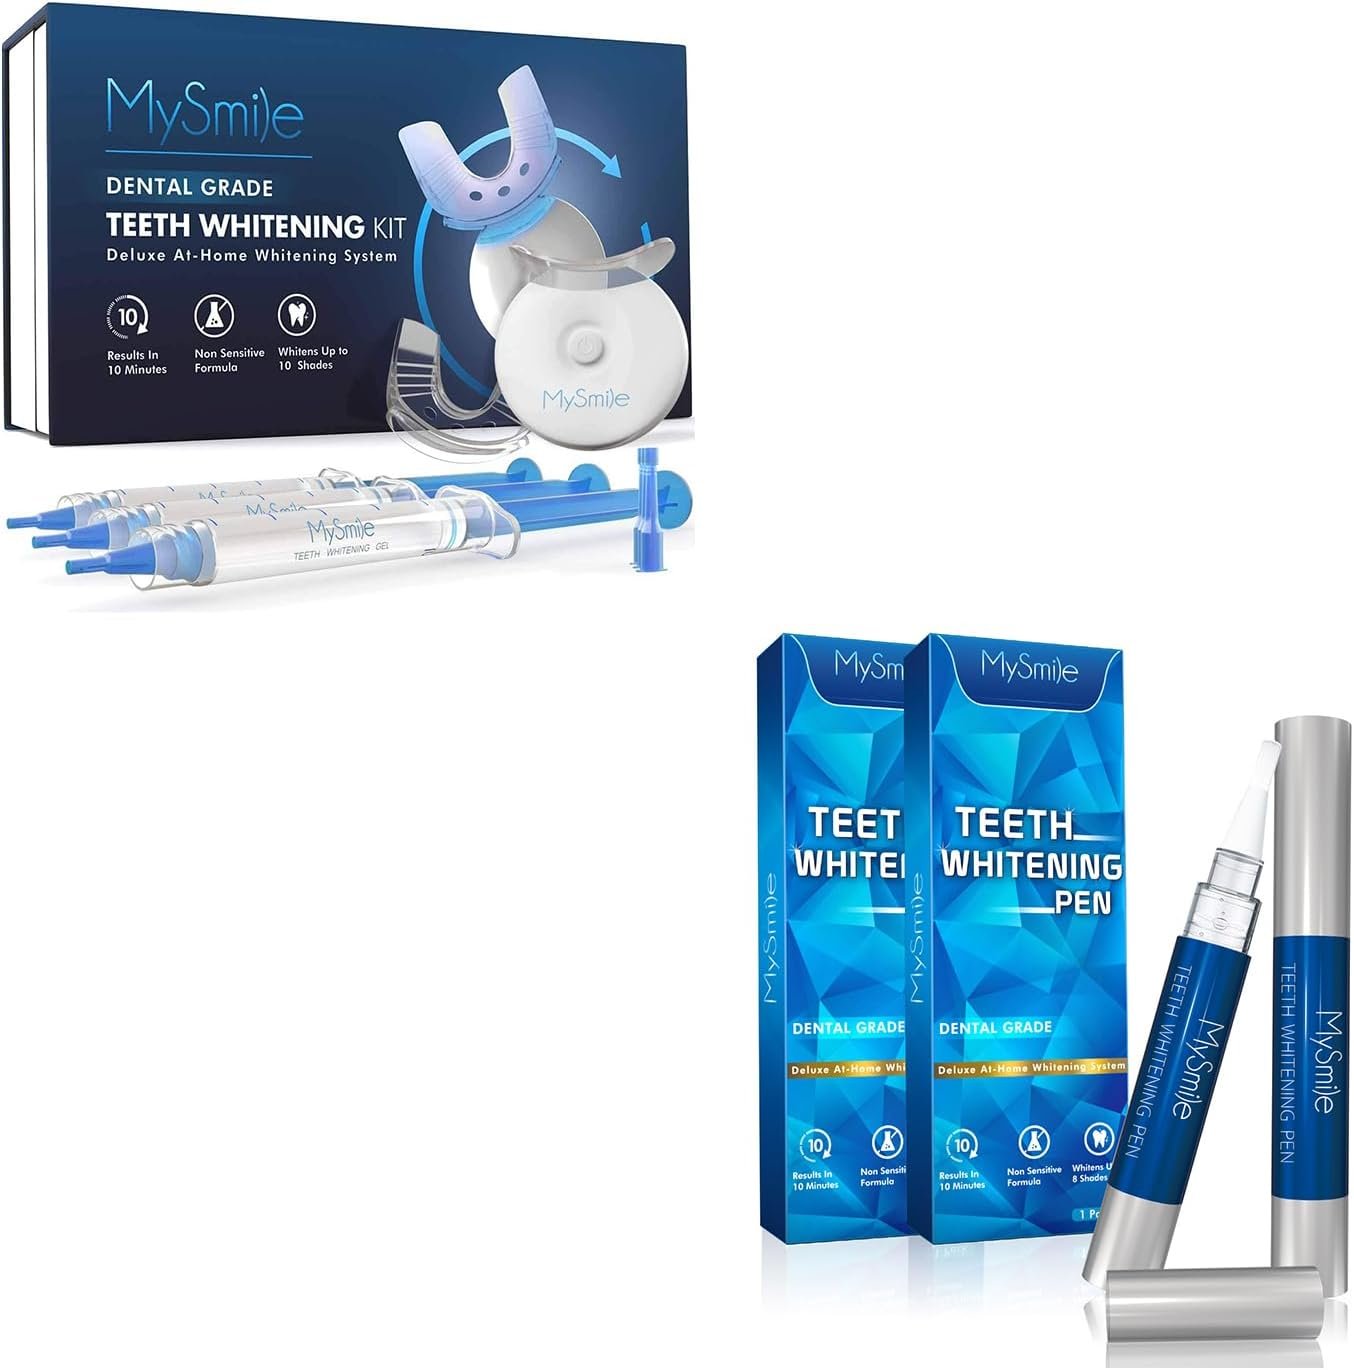 MySmile Teeth Whitening Kit with LED Light, 10 Min Non-Sensitive Fast Teeth Whitening Pen Kit 32 Treatments Gel,Helps to Remove Stains from Coffee, Smoking, Wines, Soda, Food